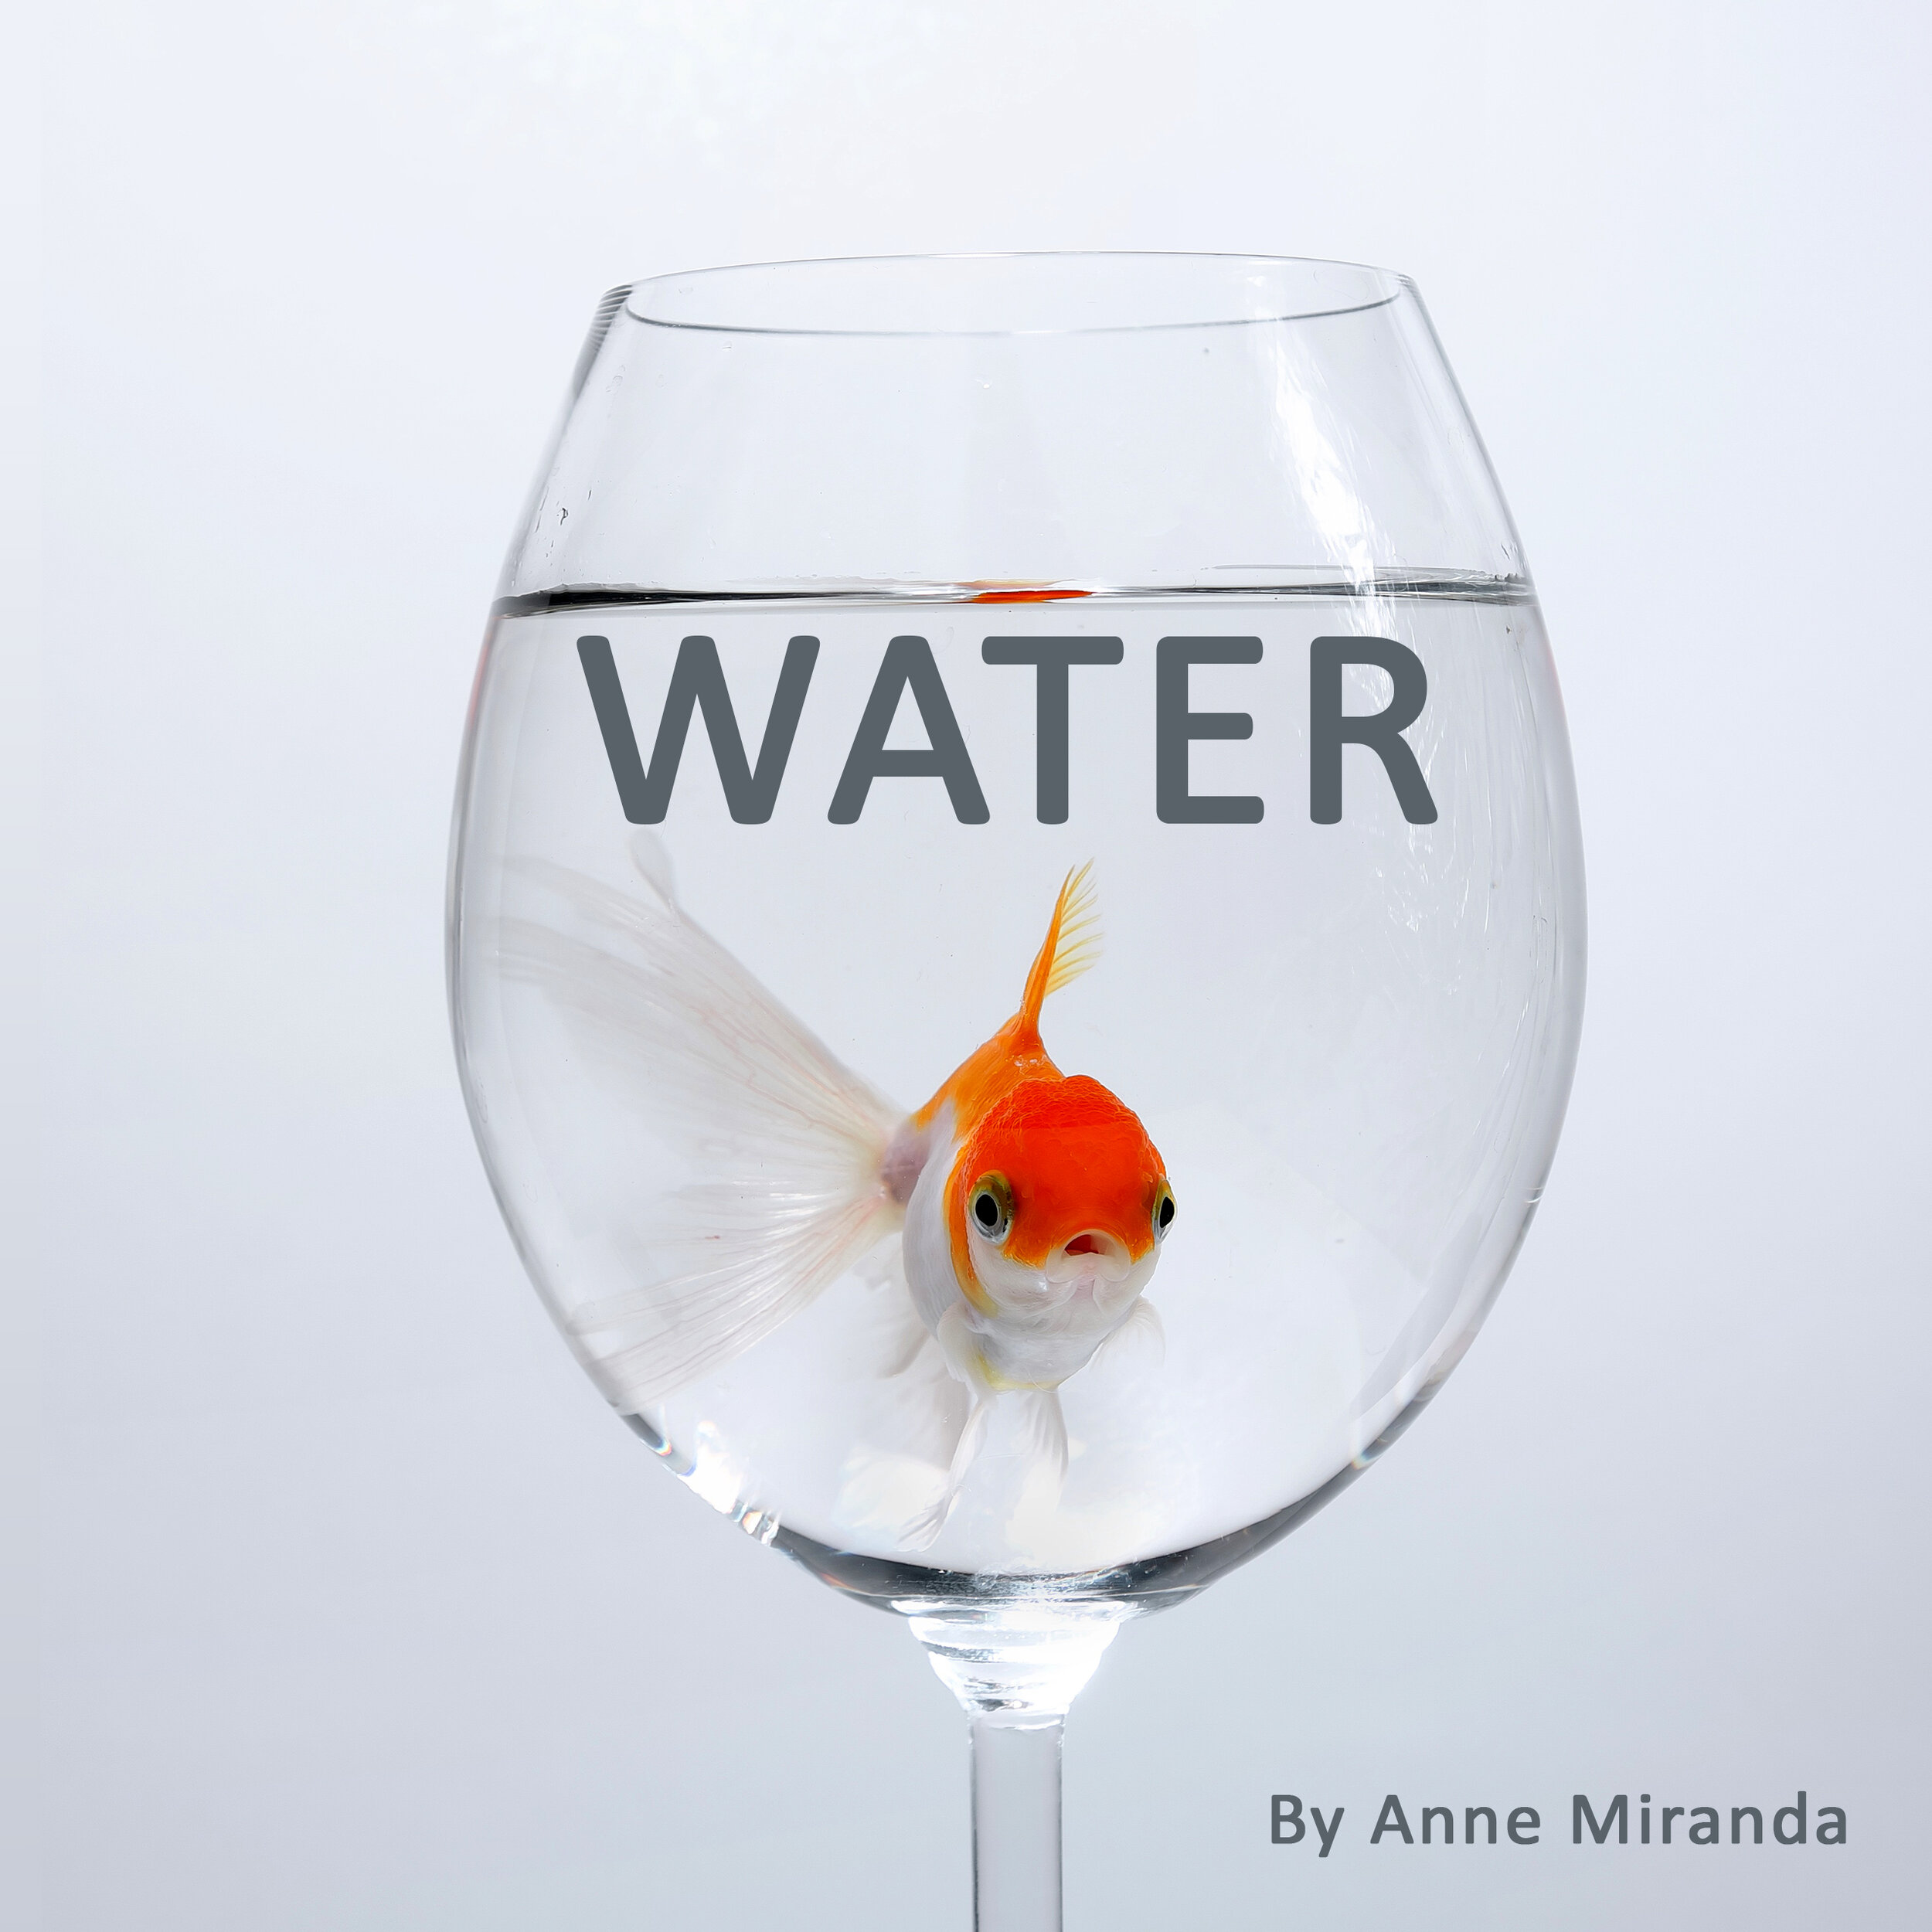 Water illustrated with photographs